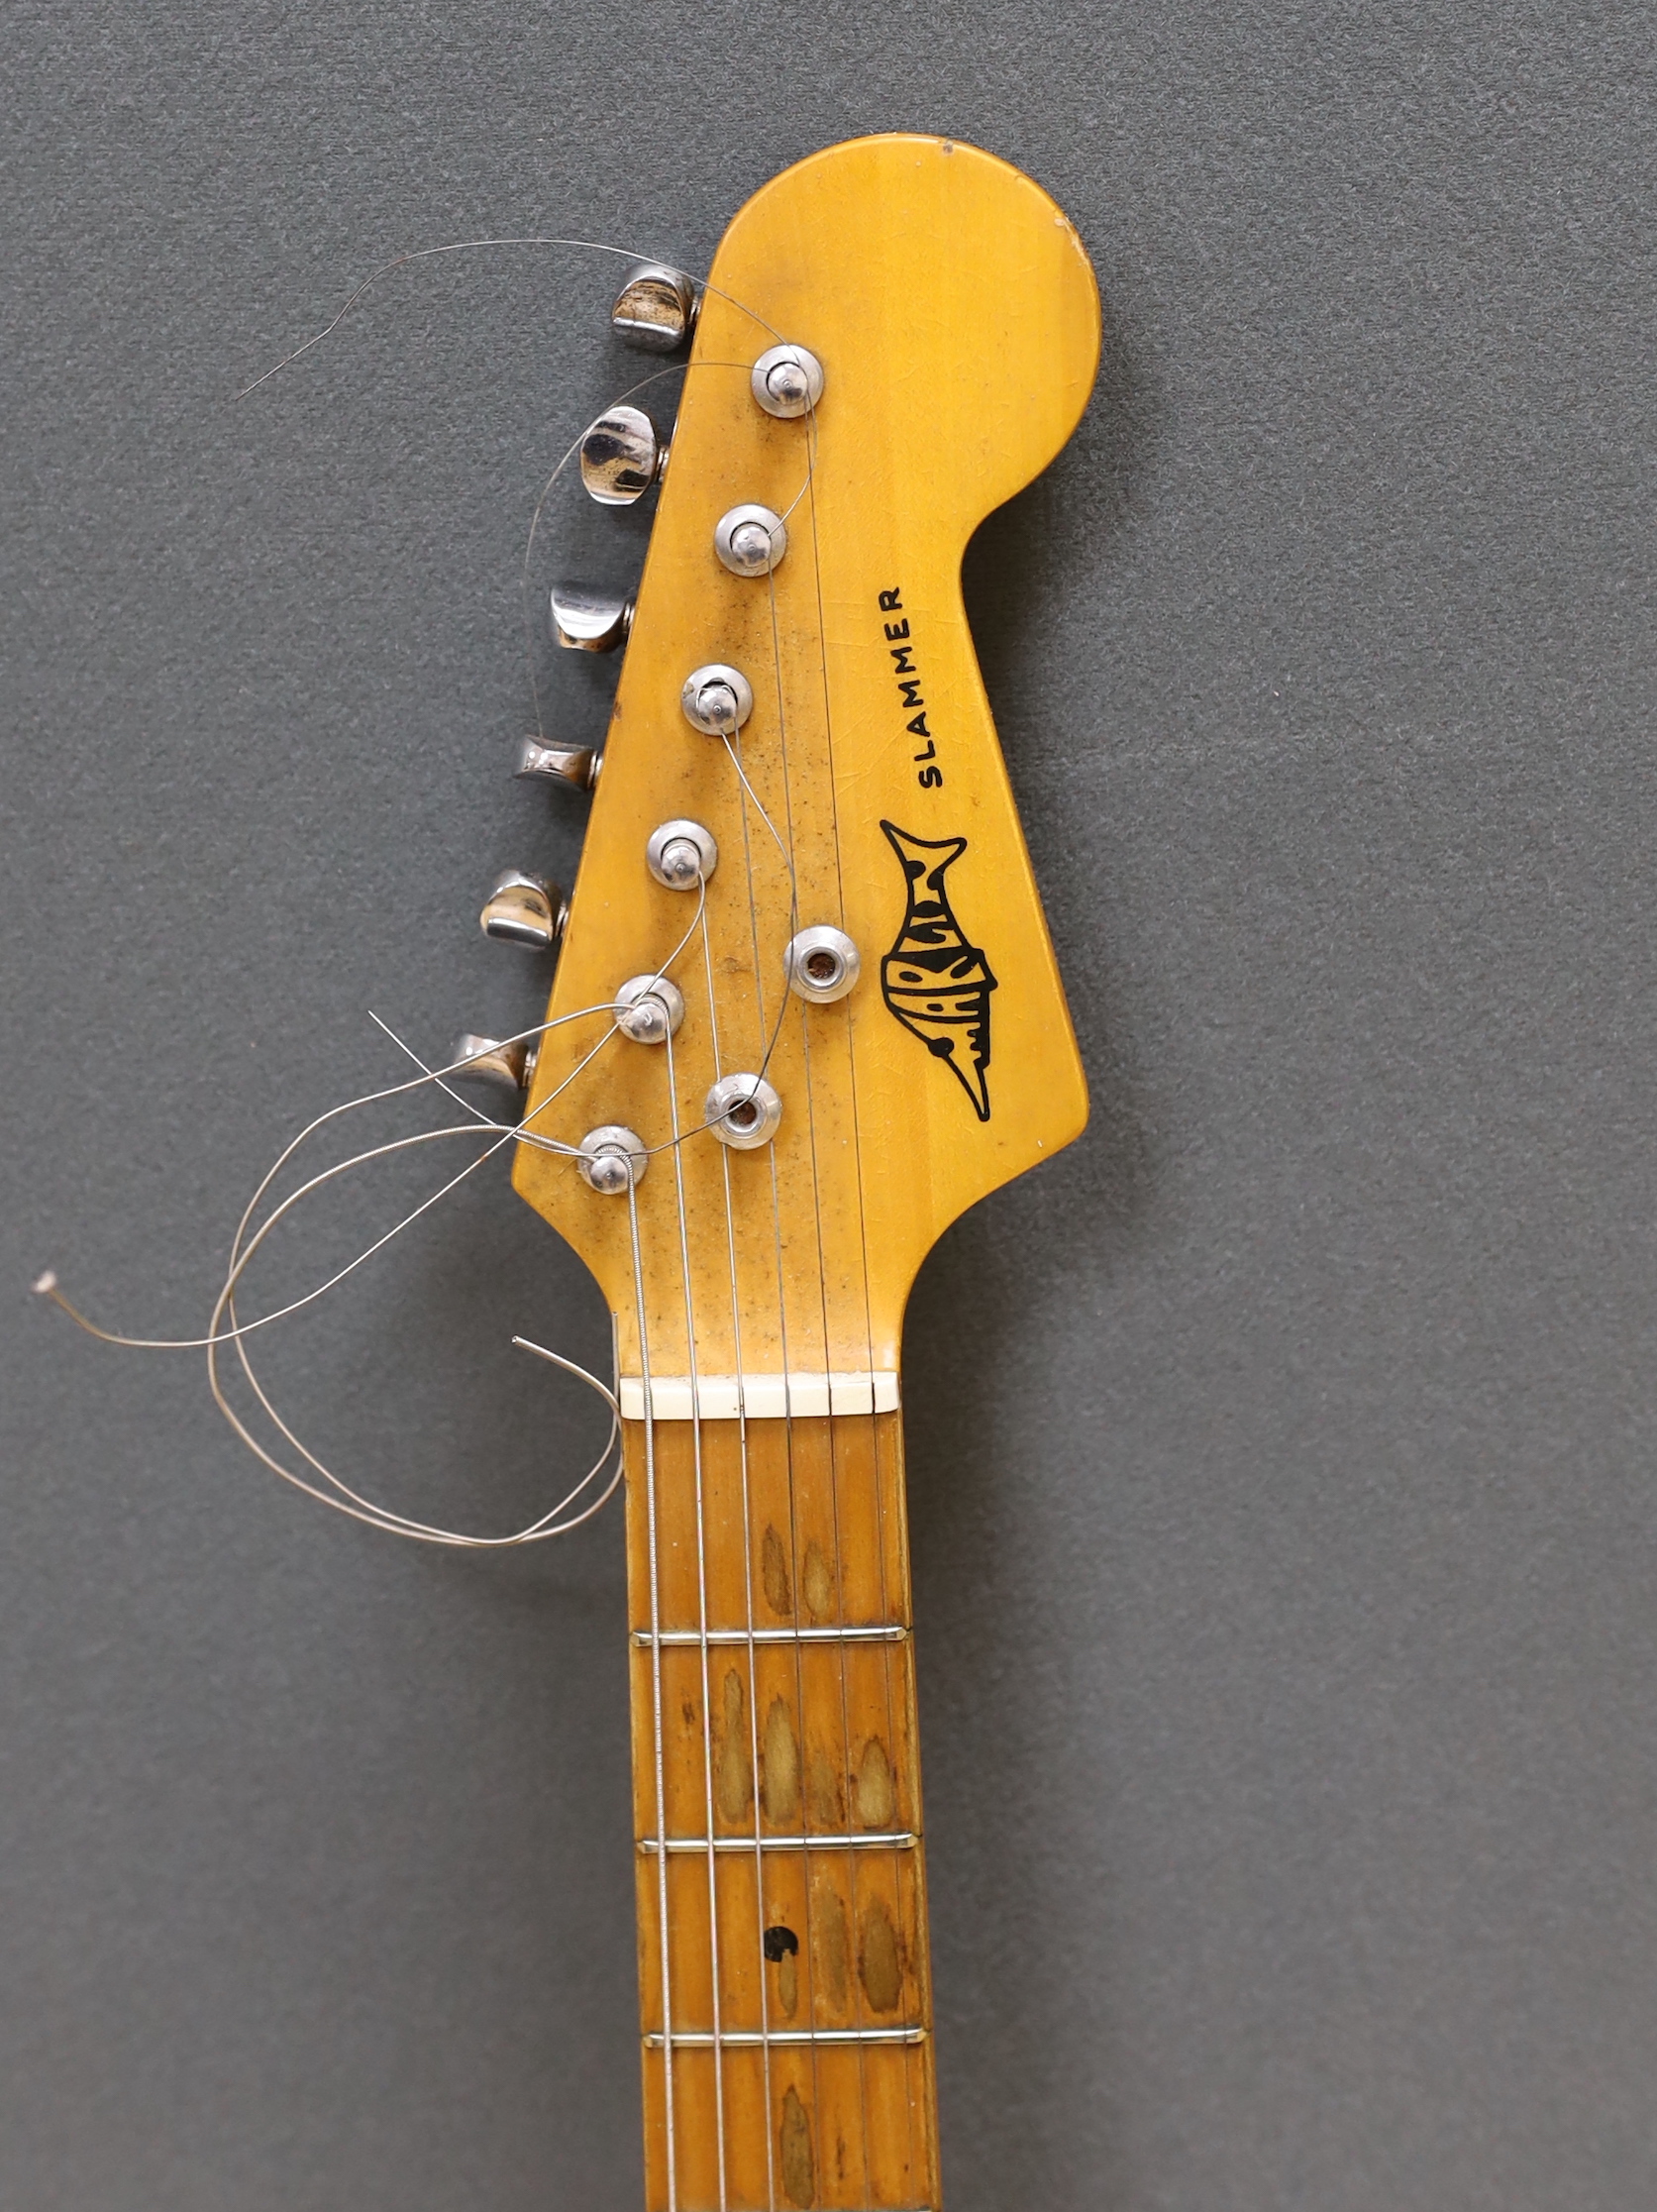 A Marlin Slammer electric guitar with maple neck, together with a flight case